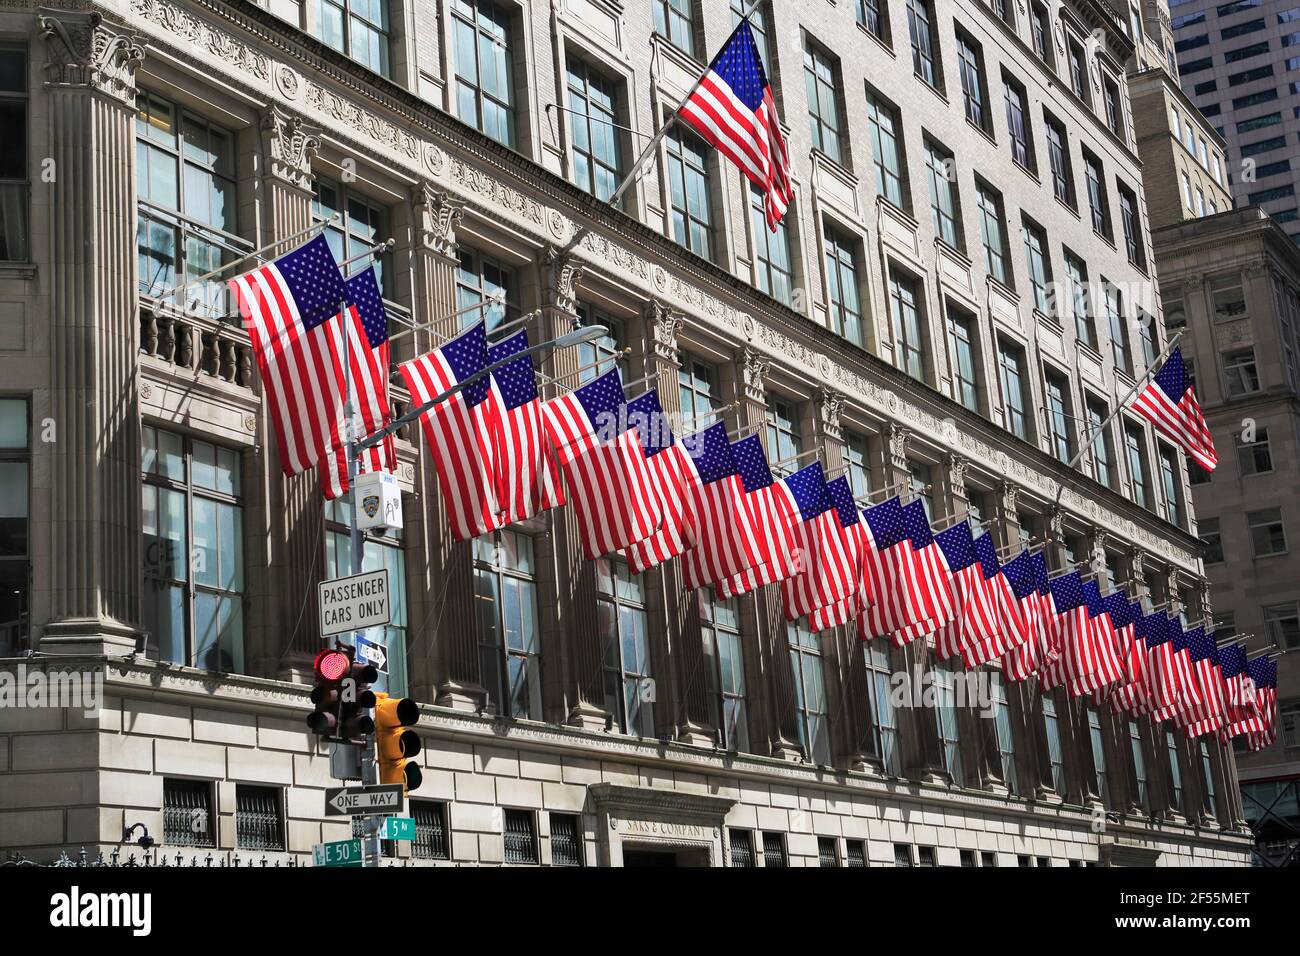 Saks Fifth Avenue, Department Store, American Flags, 5th Avenue, Midtown, Manhattan, Nw York City, New York, USA Stock Photo